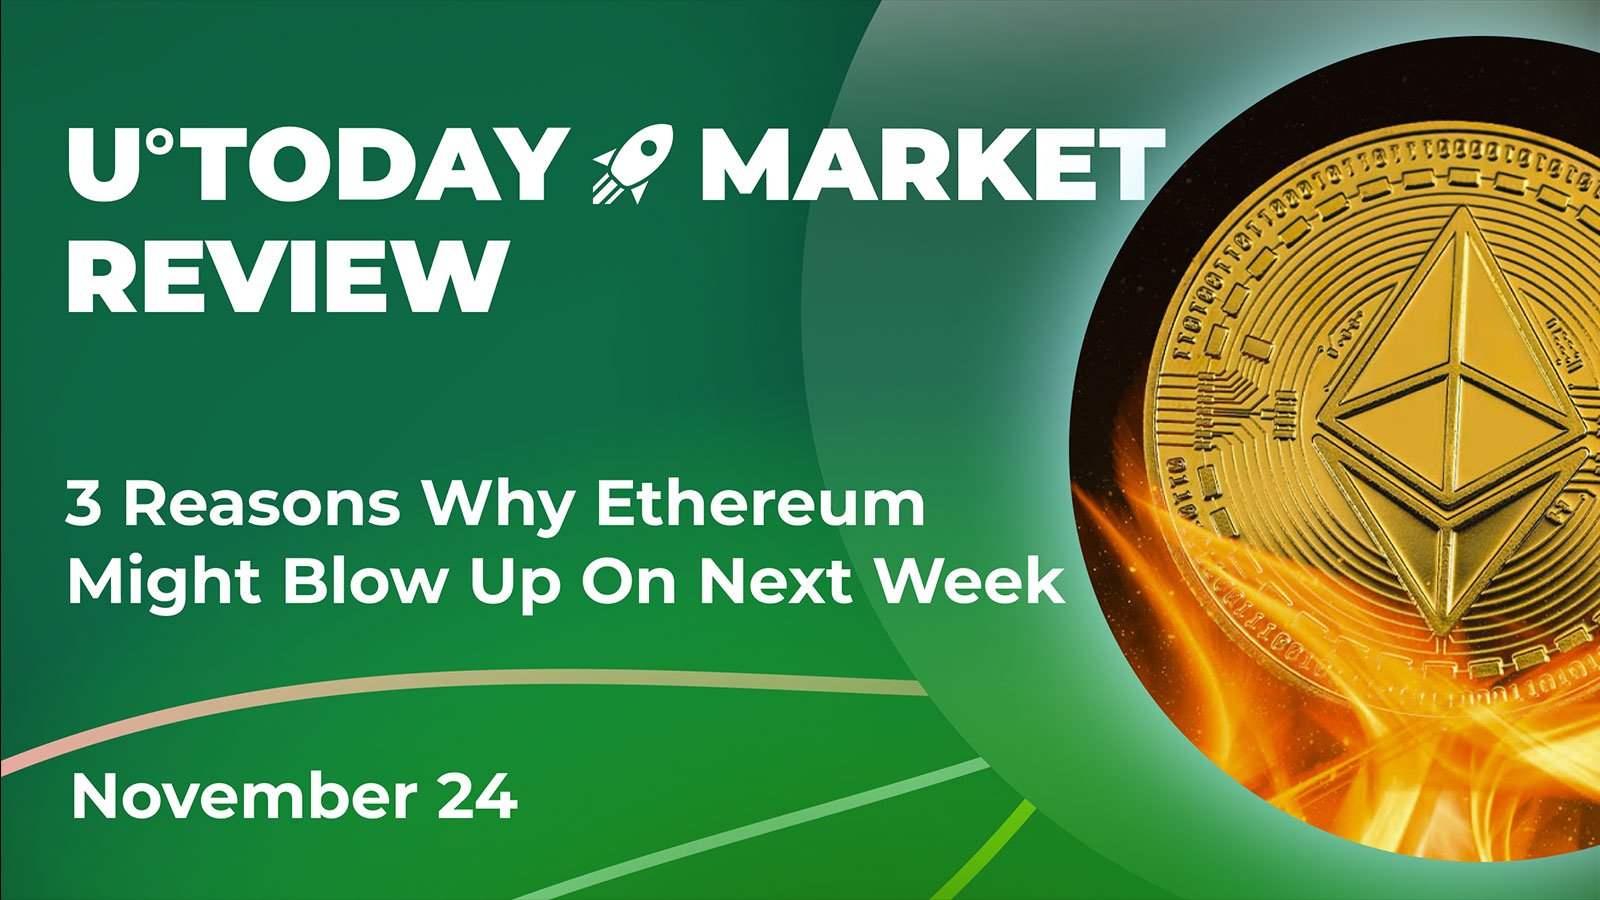 3 Reasons Why Ethereum Might Blow up Next Week: Crypto Market Review, Nov. 24